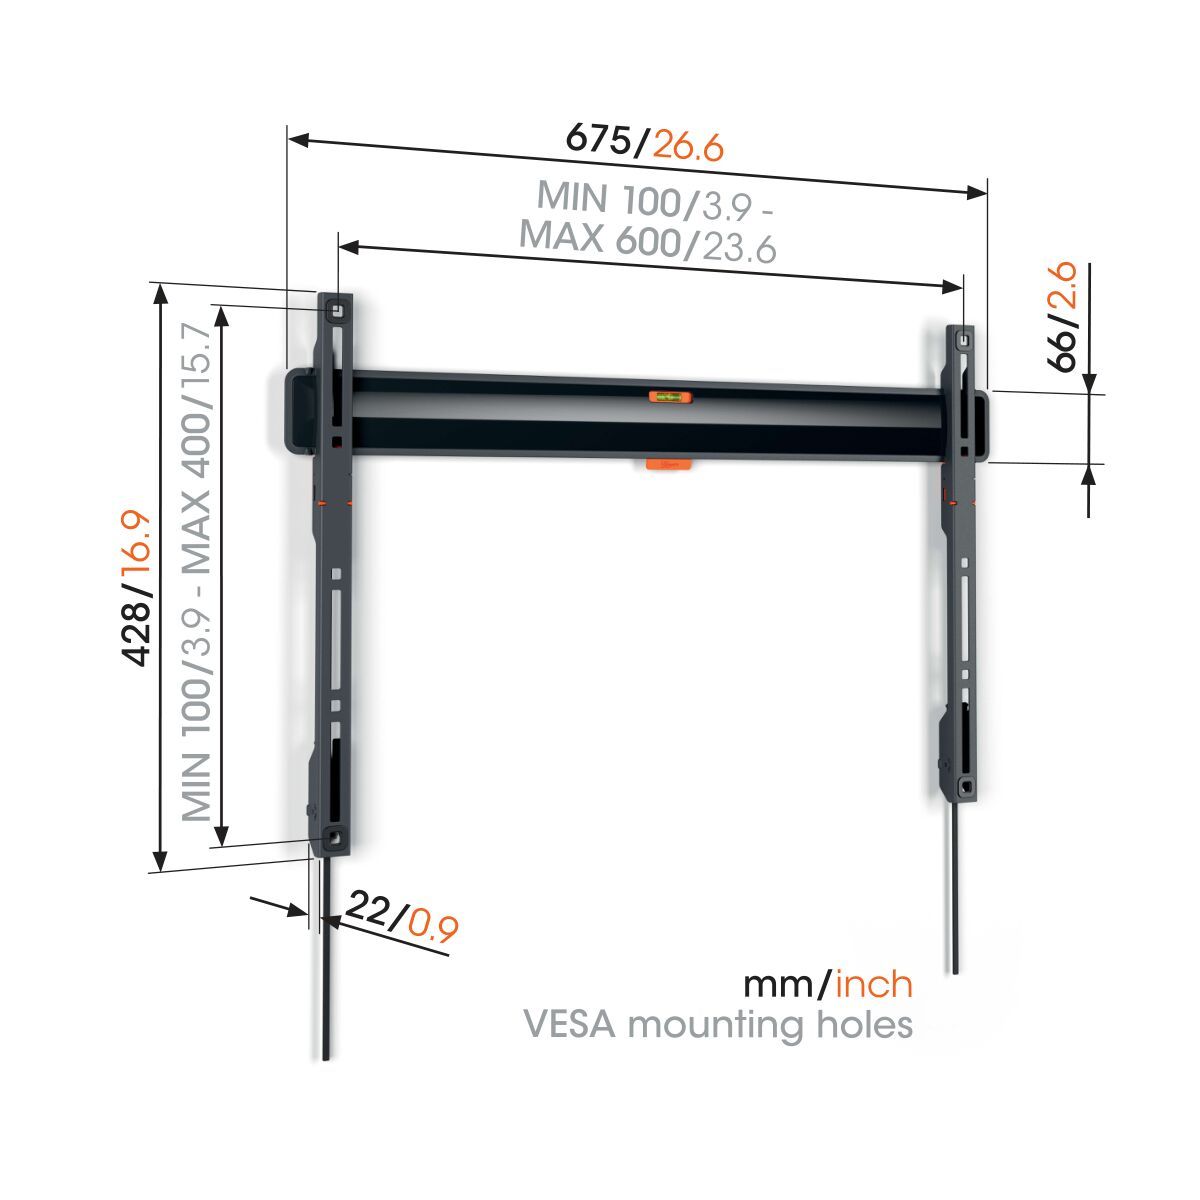 Vogel's TVM 3603 Fixed TV Wall Mount - Suitable for 40 up to 100 inch TVs - Dimensions